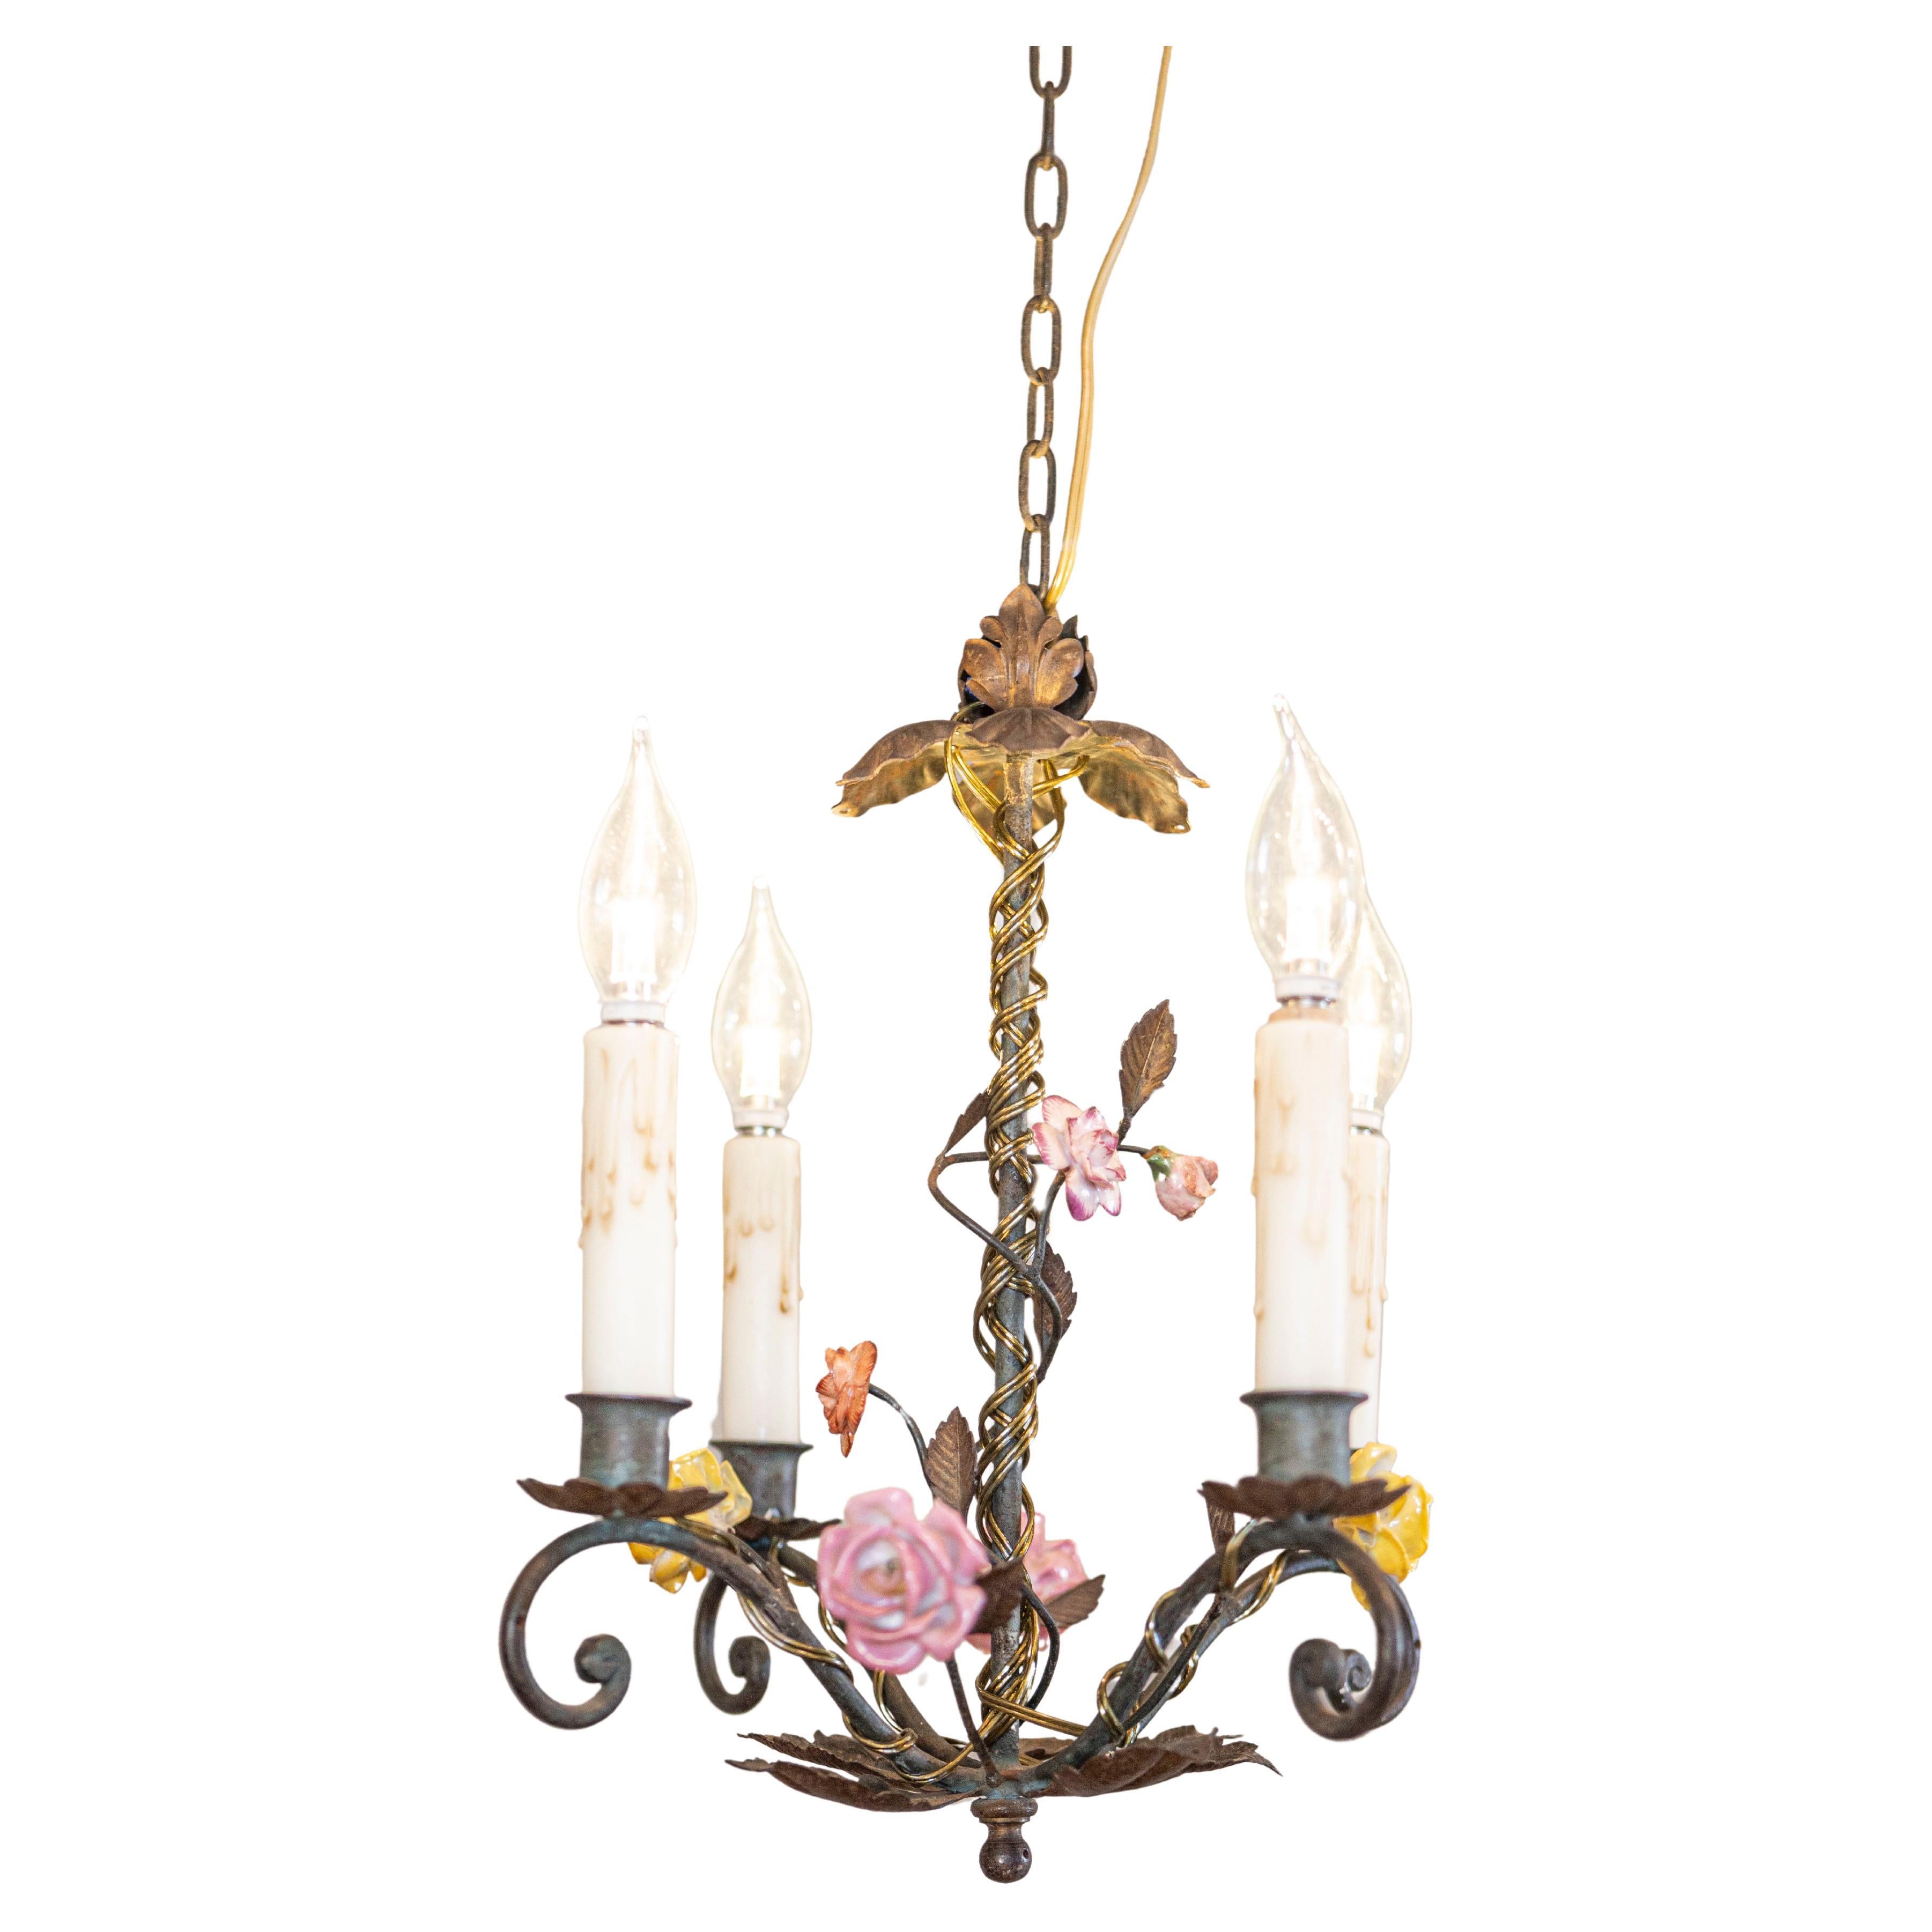 French Four-Light Chandelier with Hand-Painted Porcelain Roses and Foliage